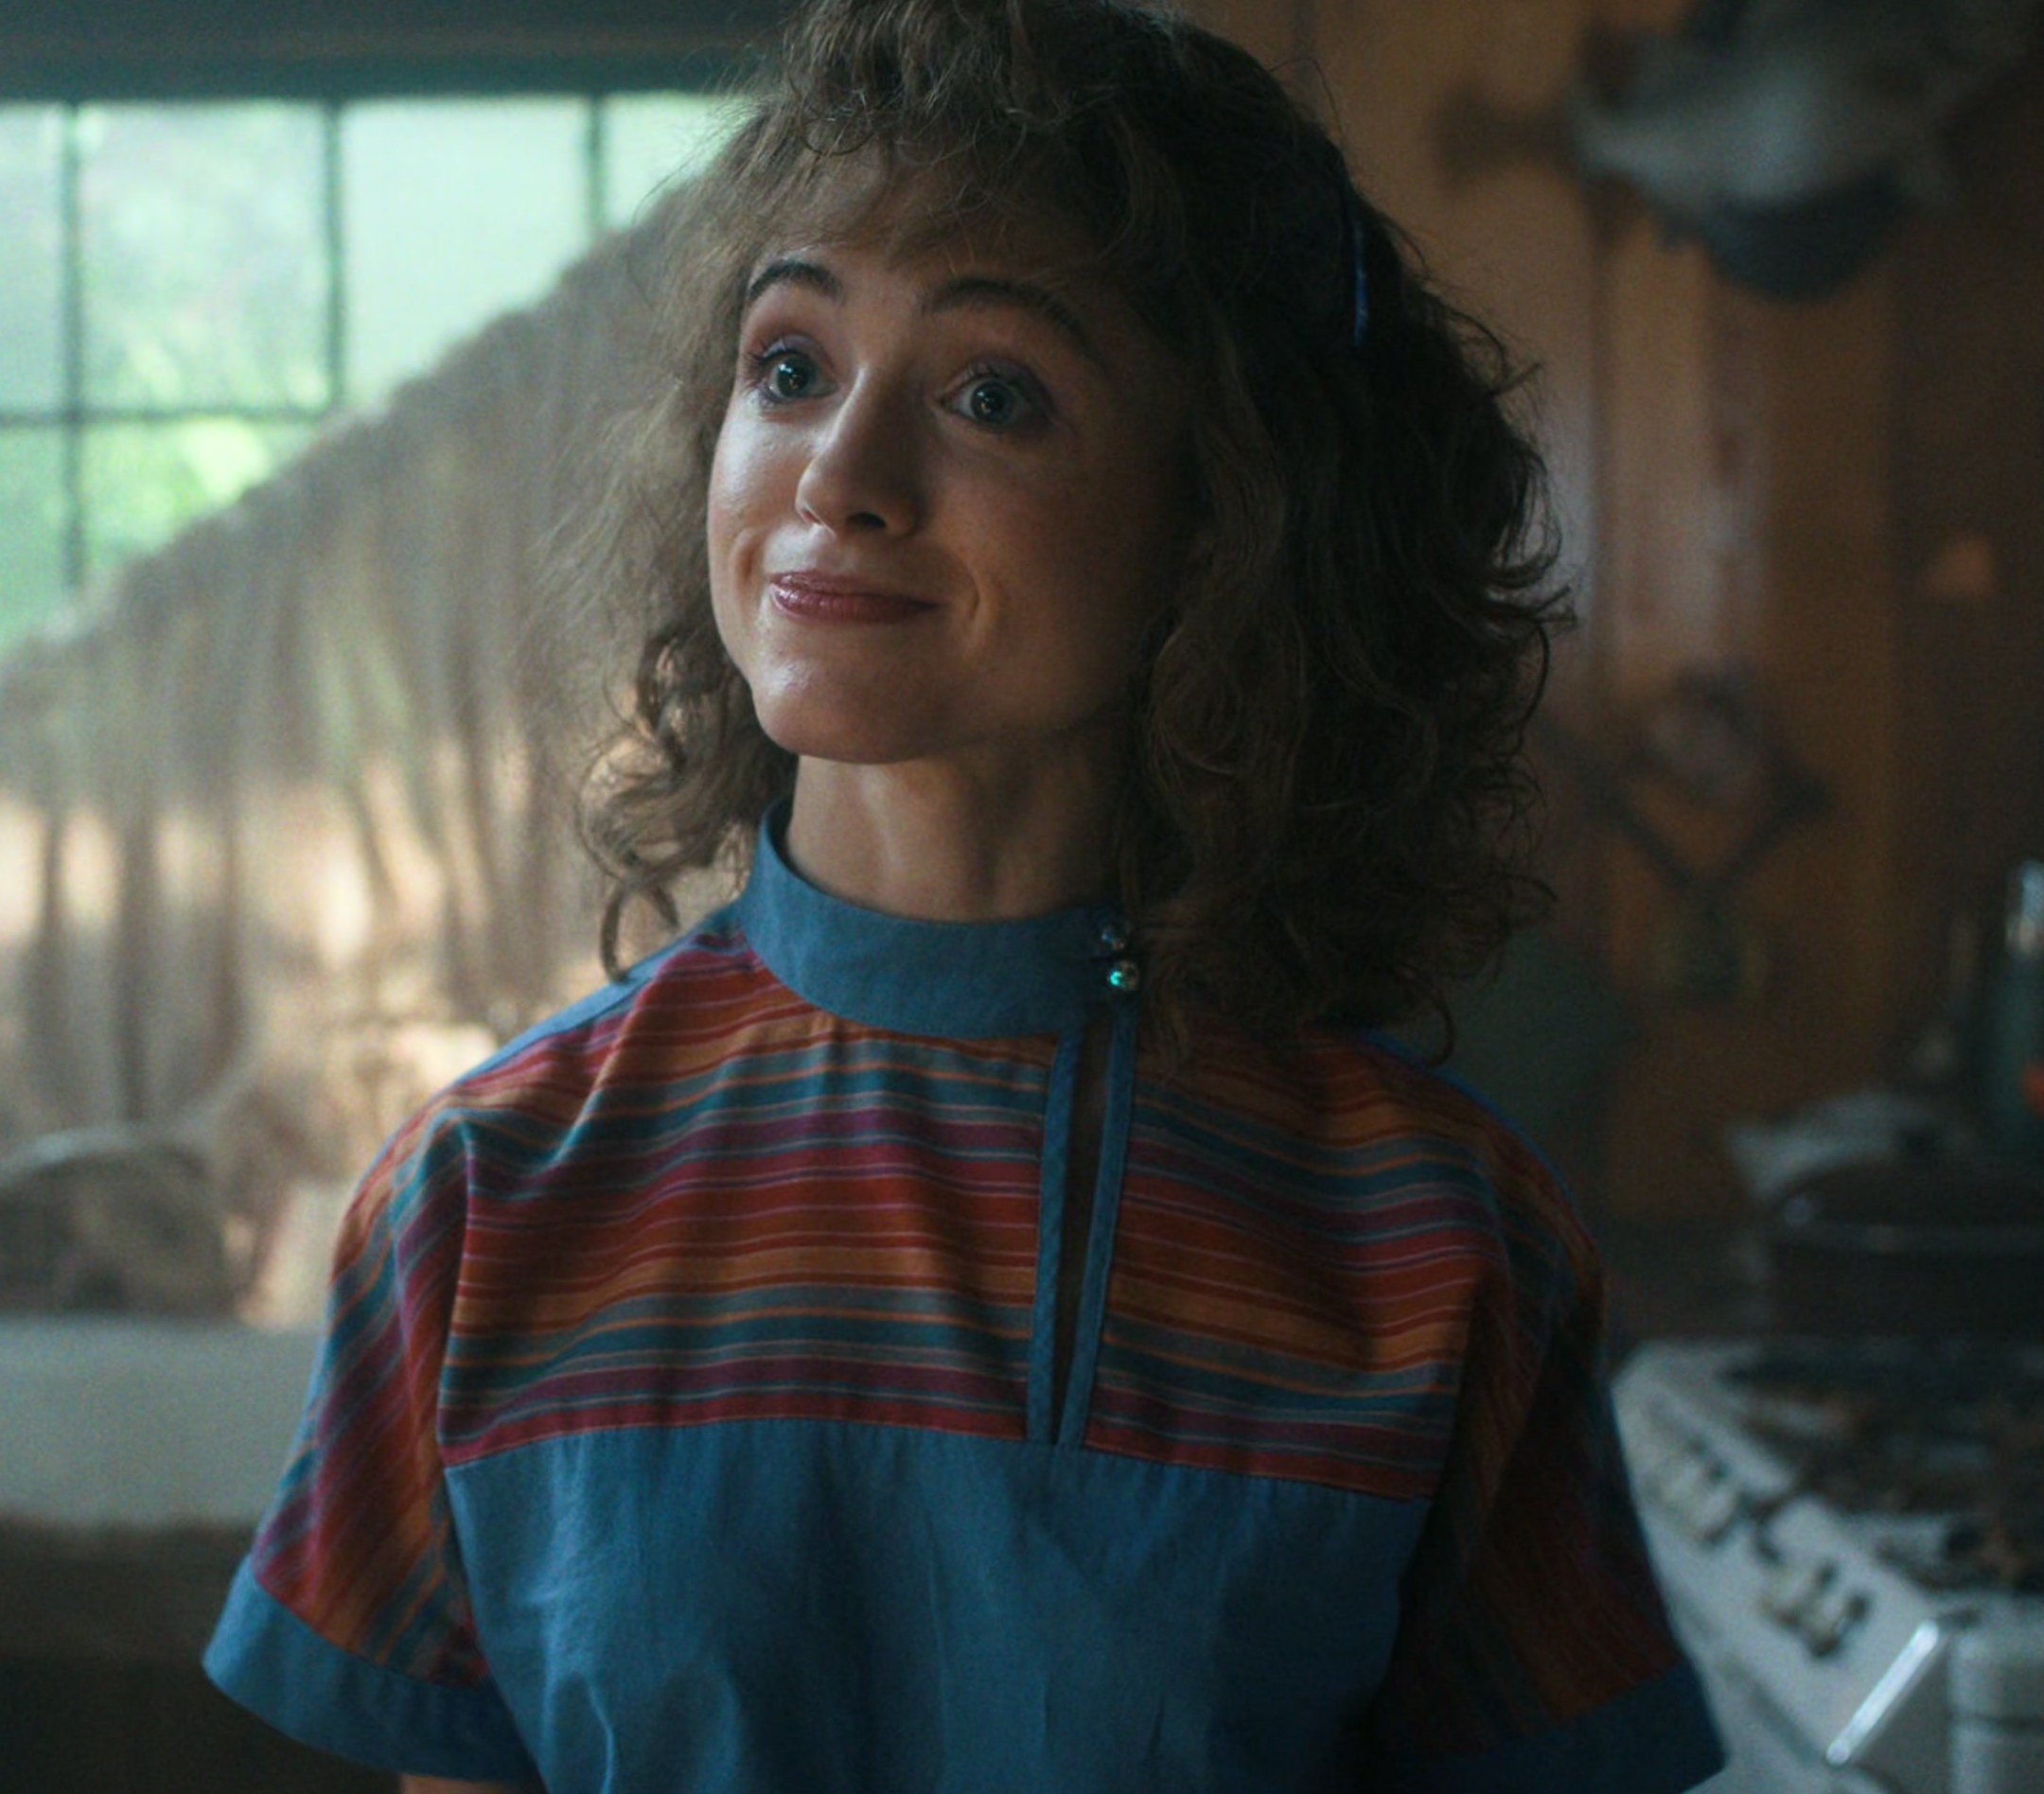 Worn on Stranger Things TV Show - Blue with Multicolor Stripes Top of Natalia Dyer as Nancy Wheeler